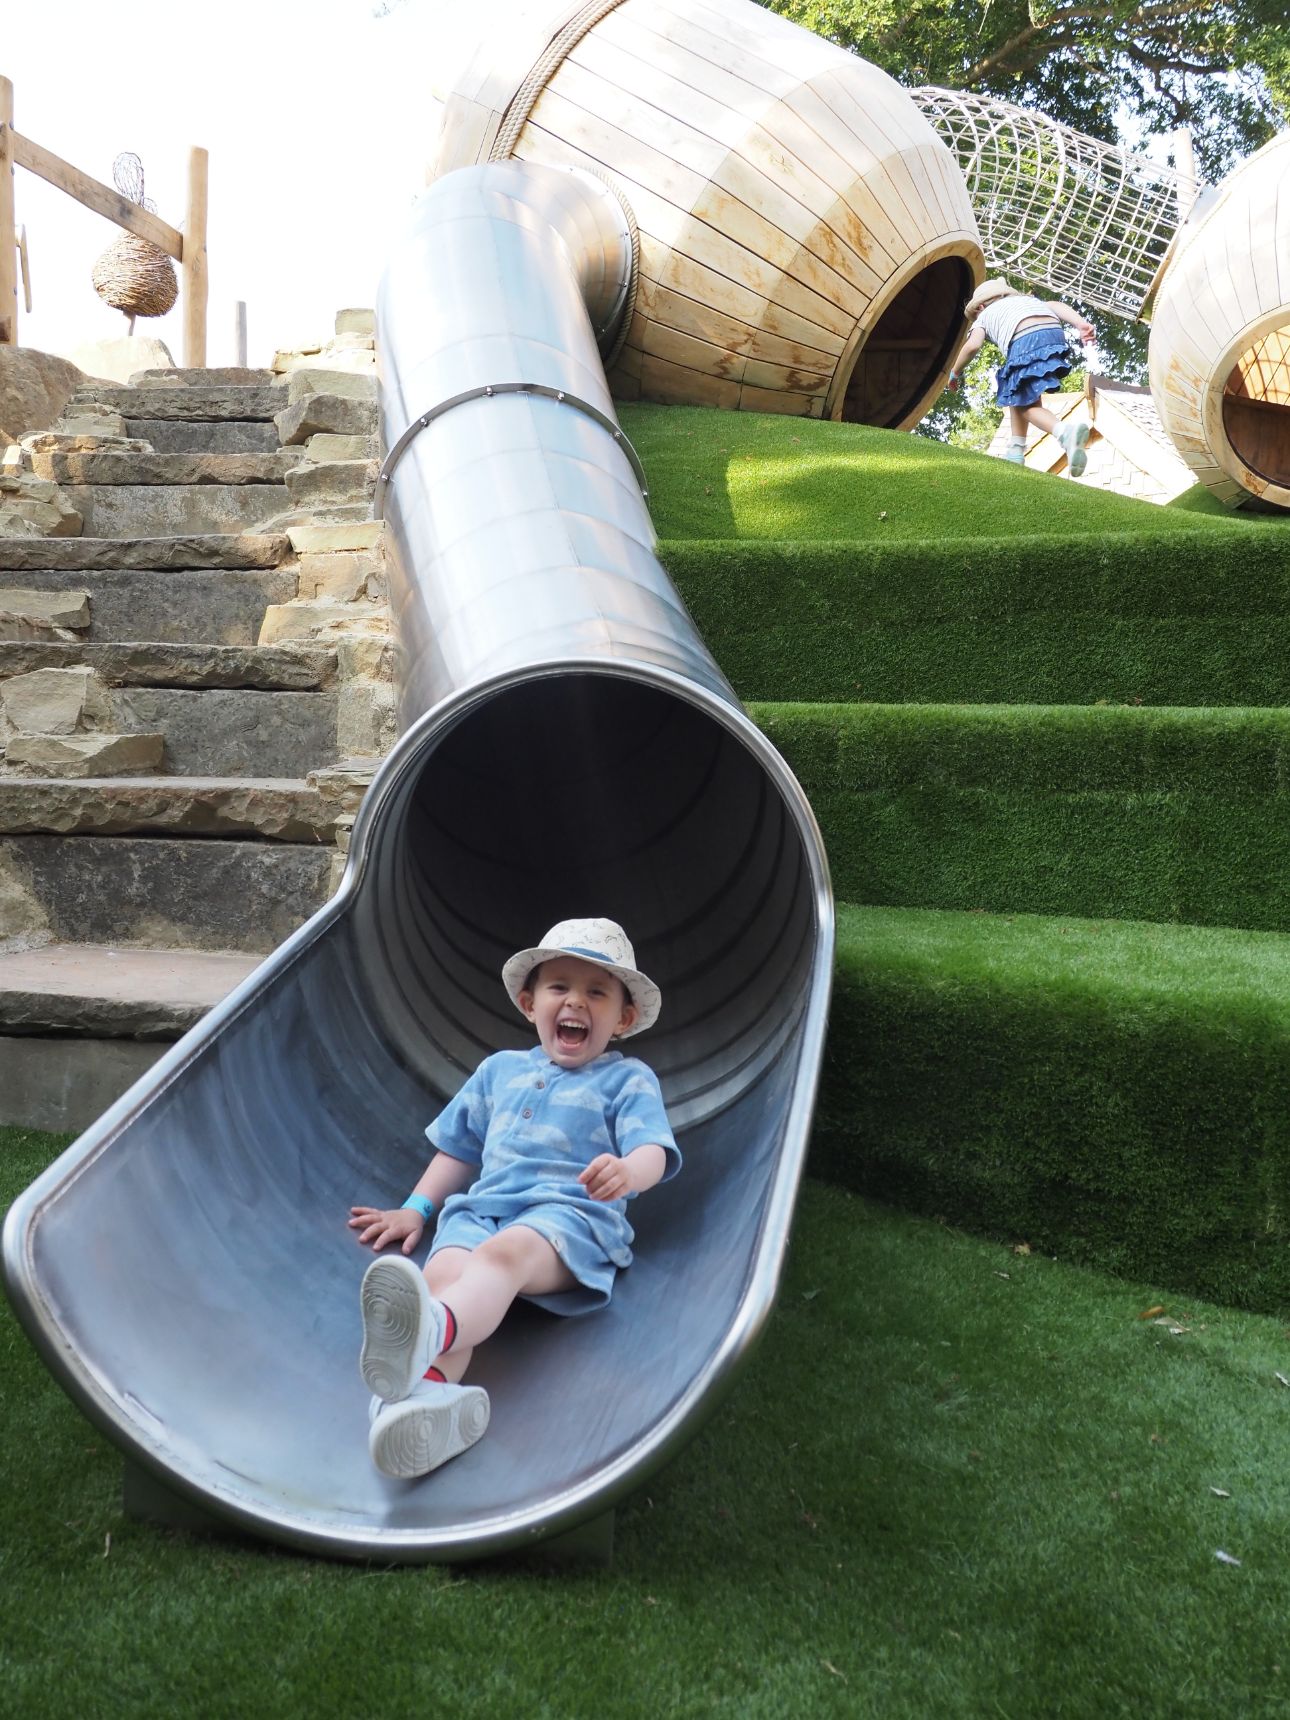 Young child at the bottom of a slide.